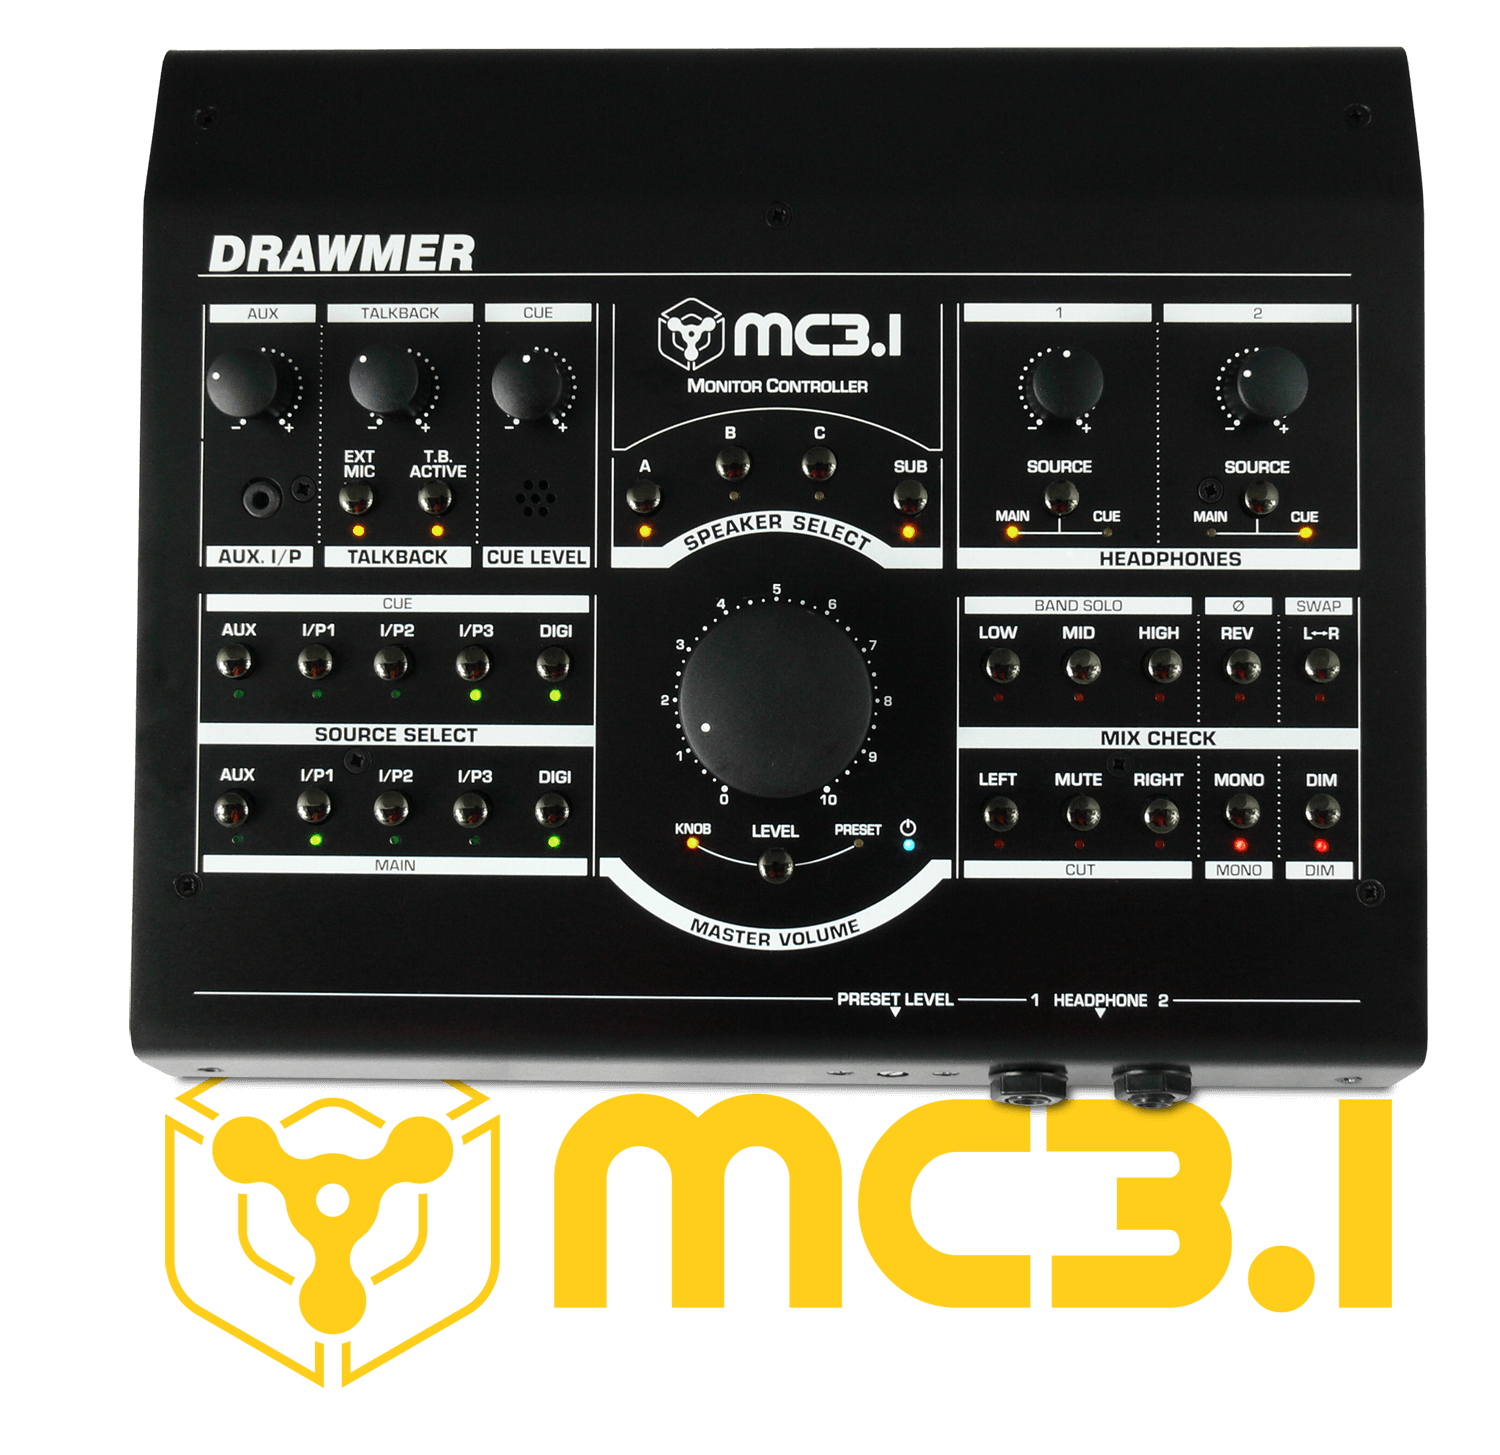 View of the MC3.1 controls directly from above with the logo below in yellow